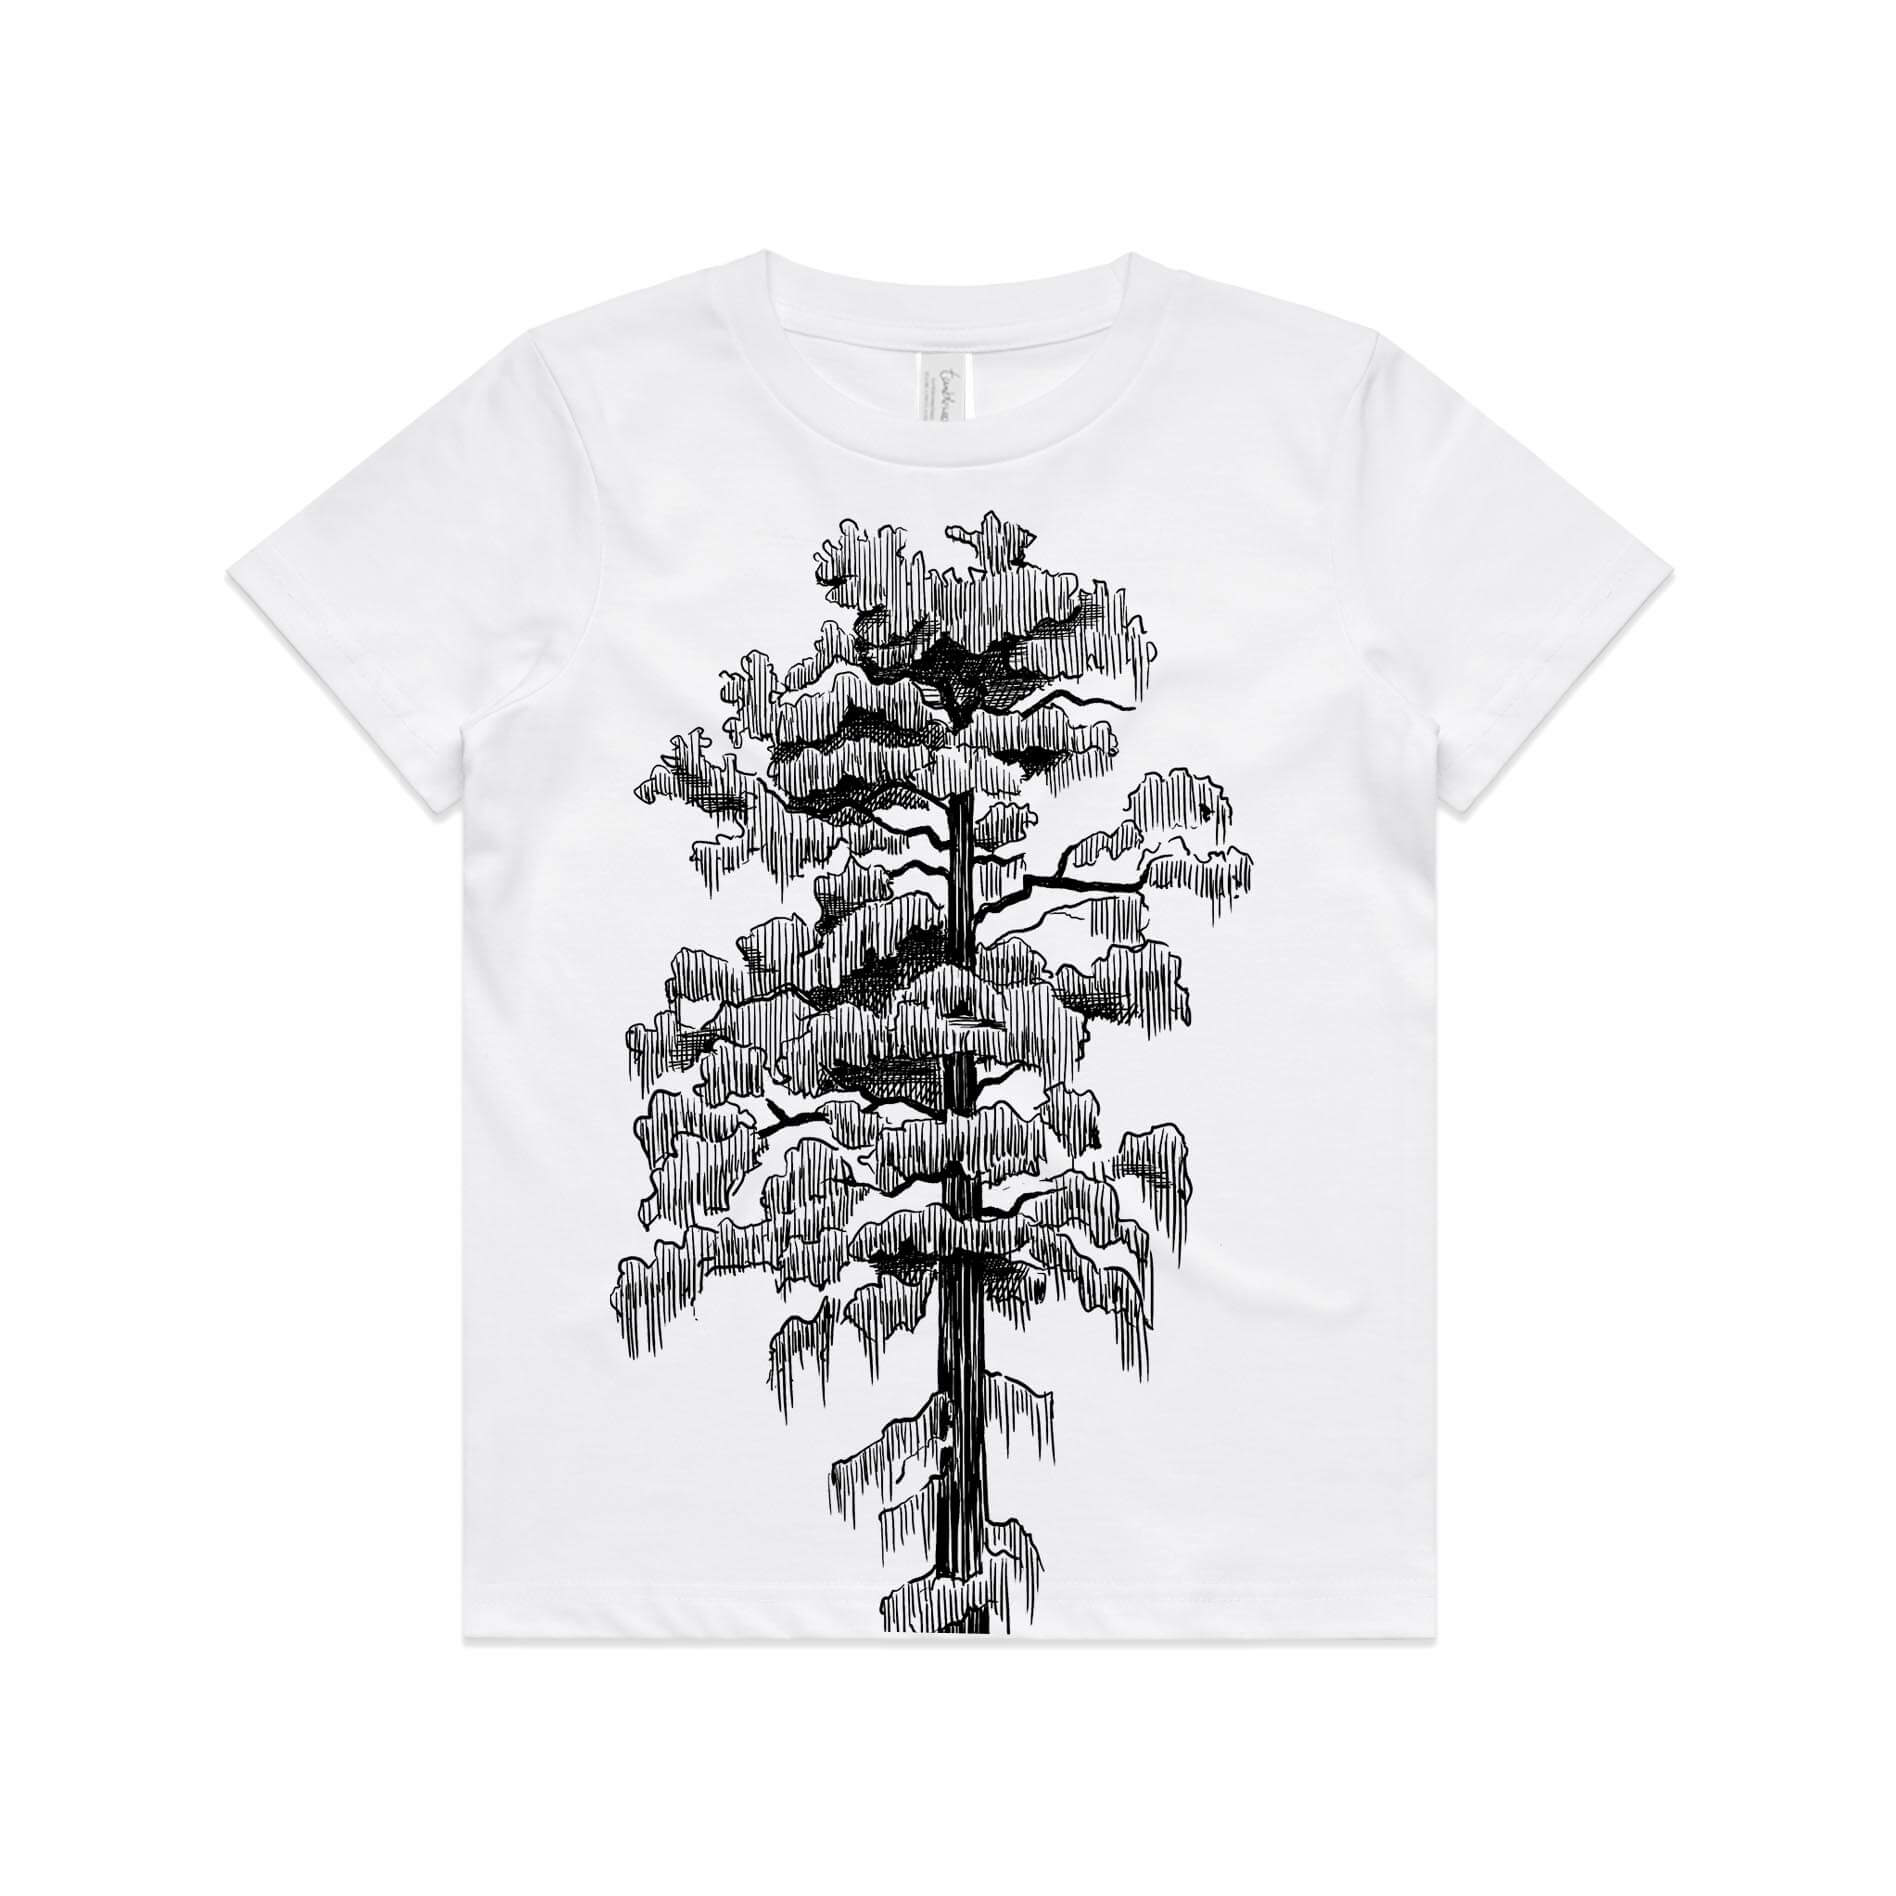 White, cotton kids' t-shirt with screen printed rimu design.